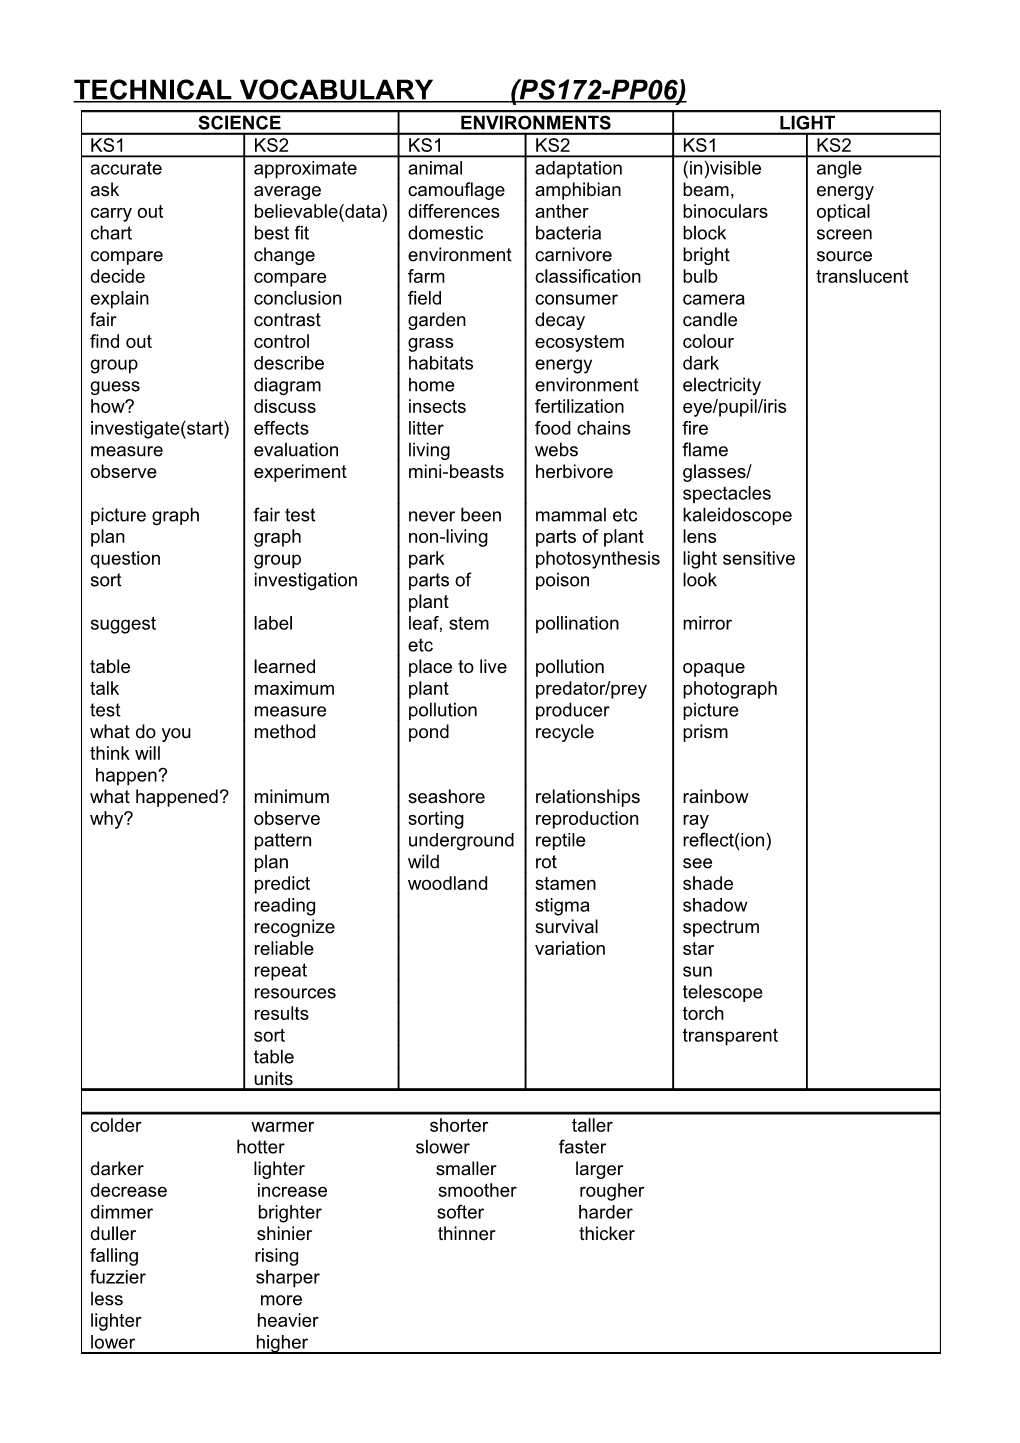 Technical Vocabulary (Ps172-Pp06)